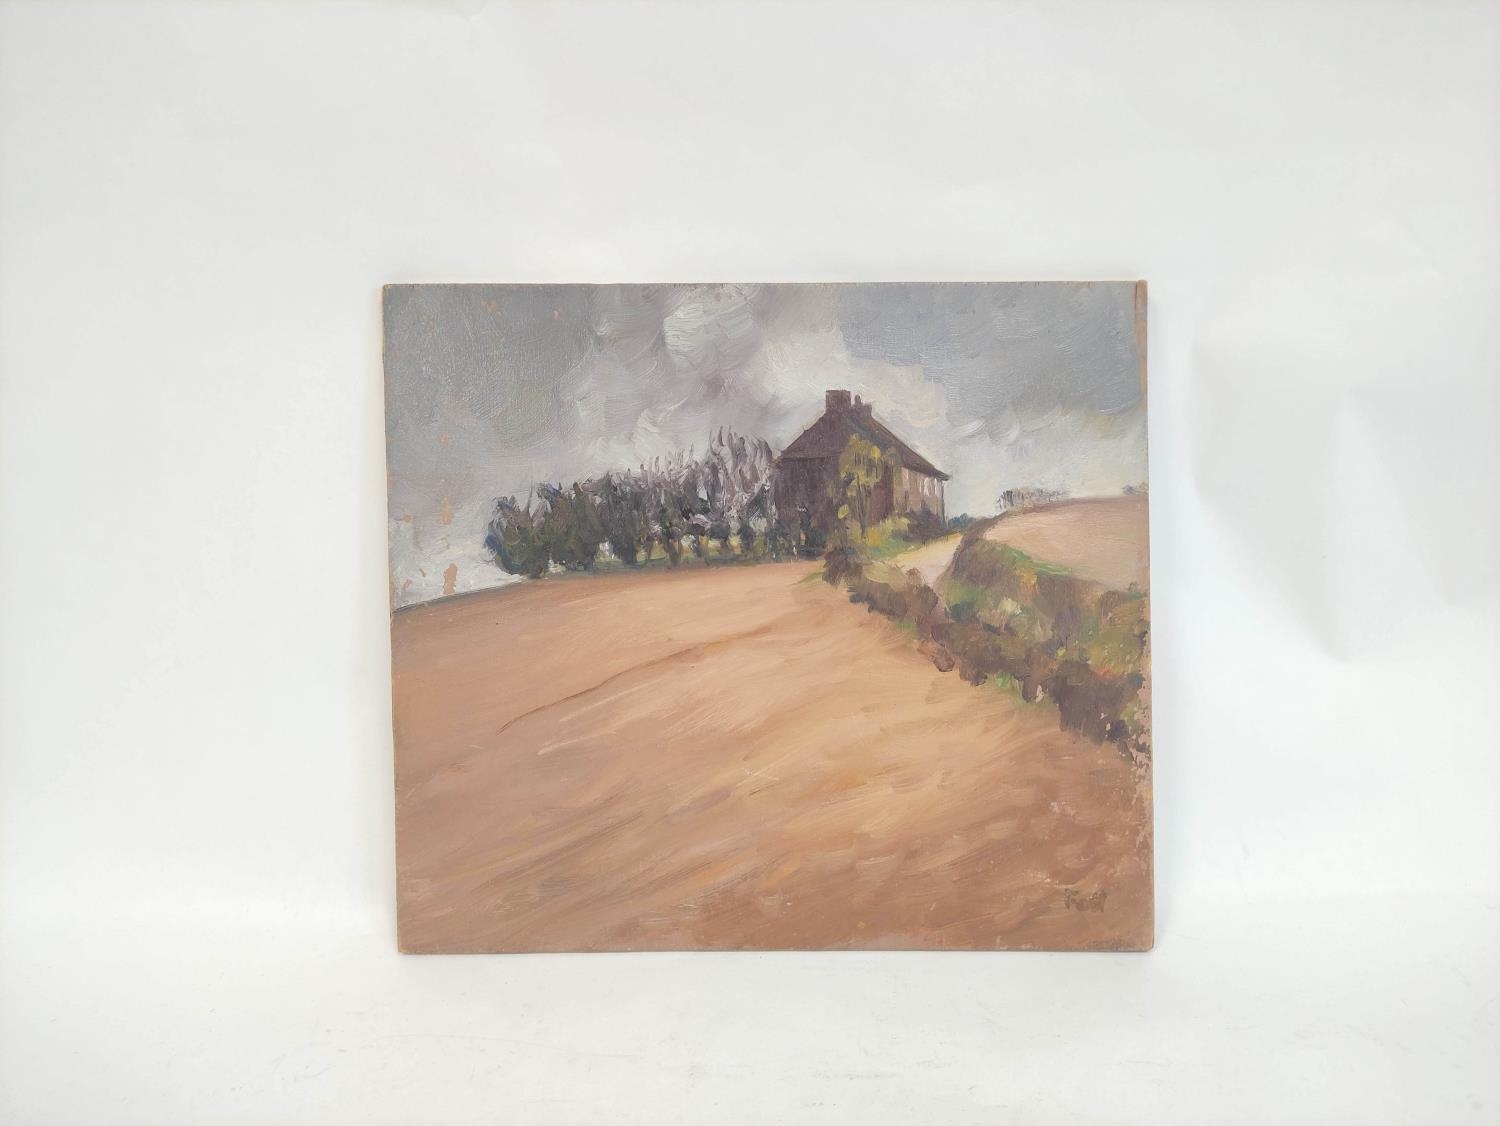 Sheila Fell R.A. (1931-1979). Farmhouse on a lane between ploughed fields. Oil on panel. Signed "